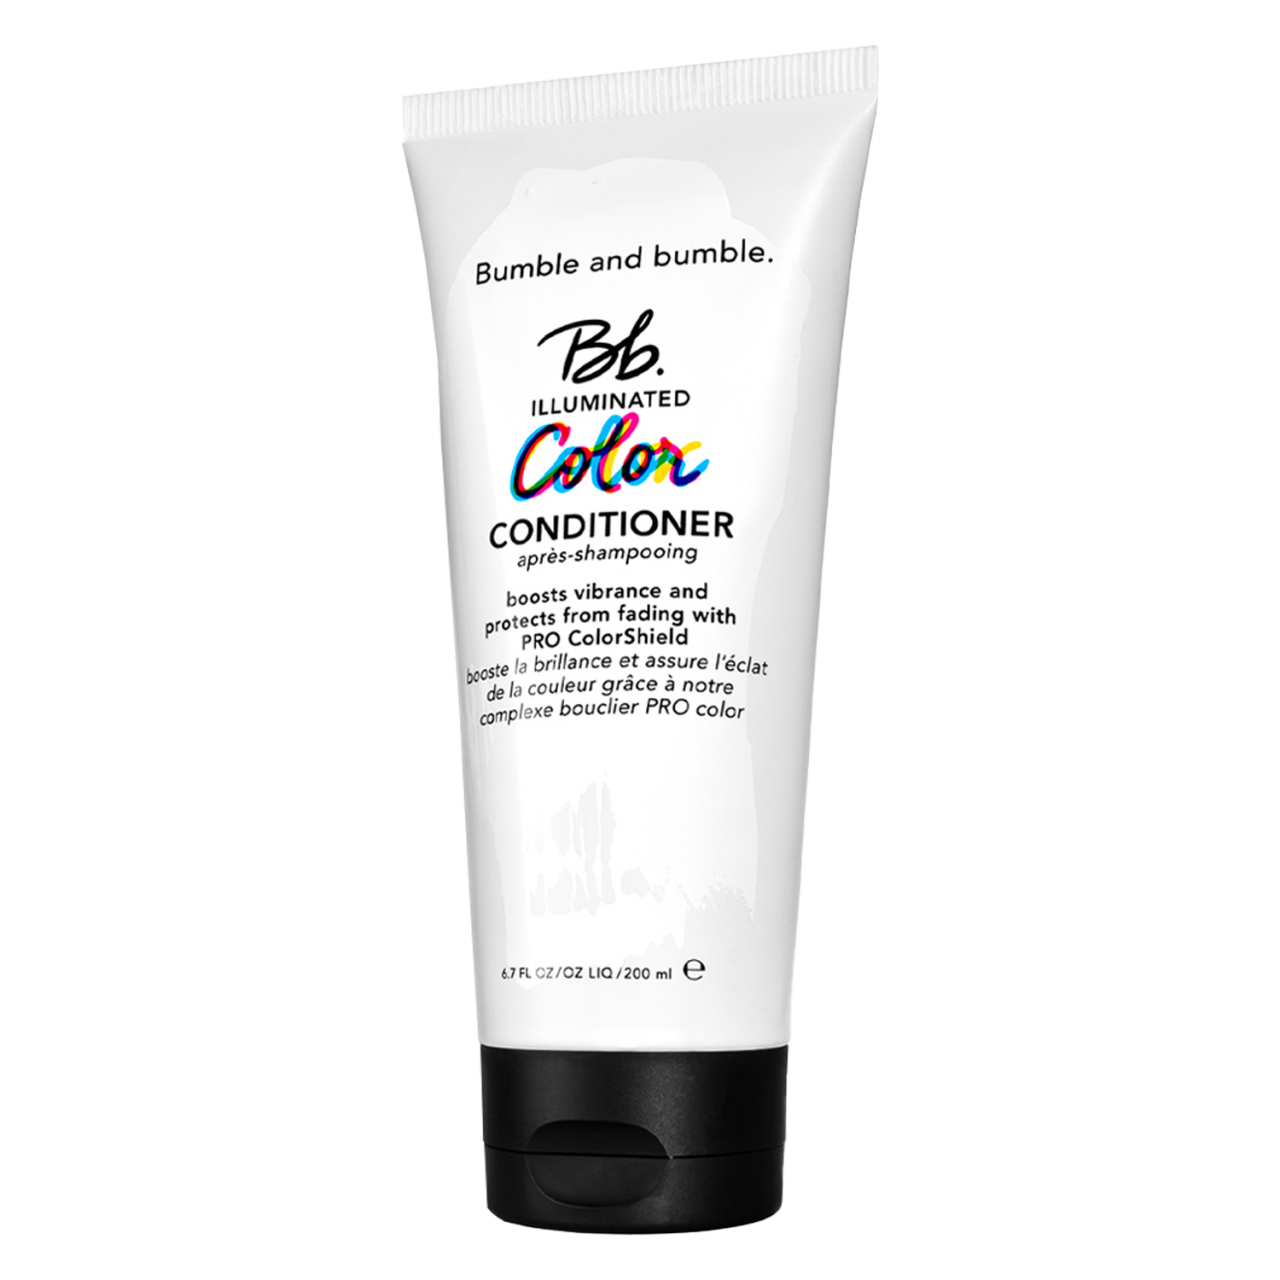 Bb. Color - Illuminated Color Conditioner von Bumble and bumble.